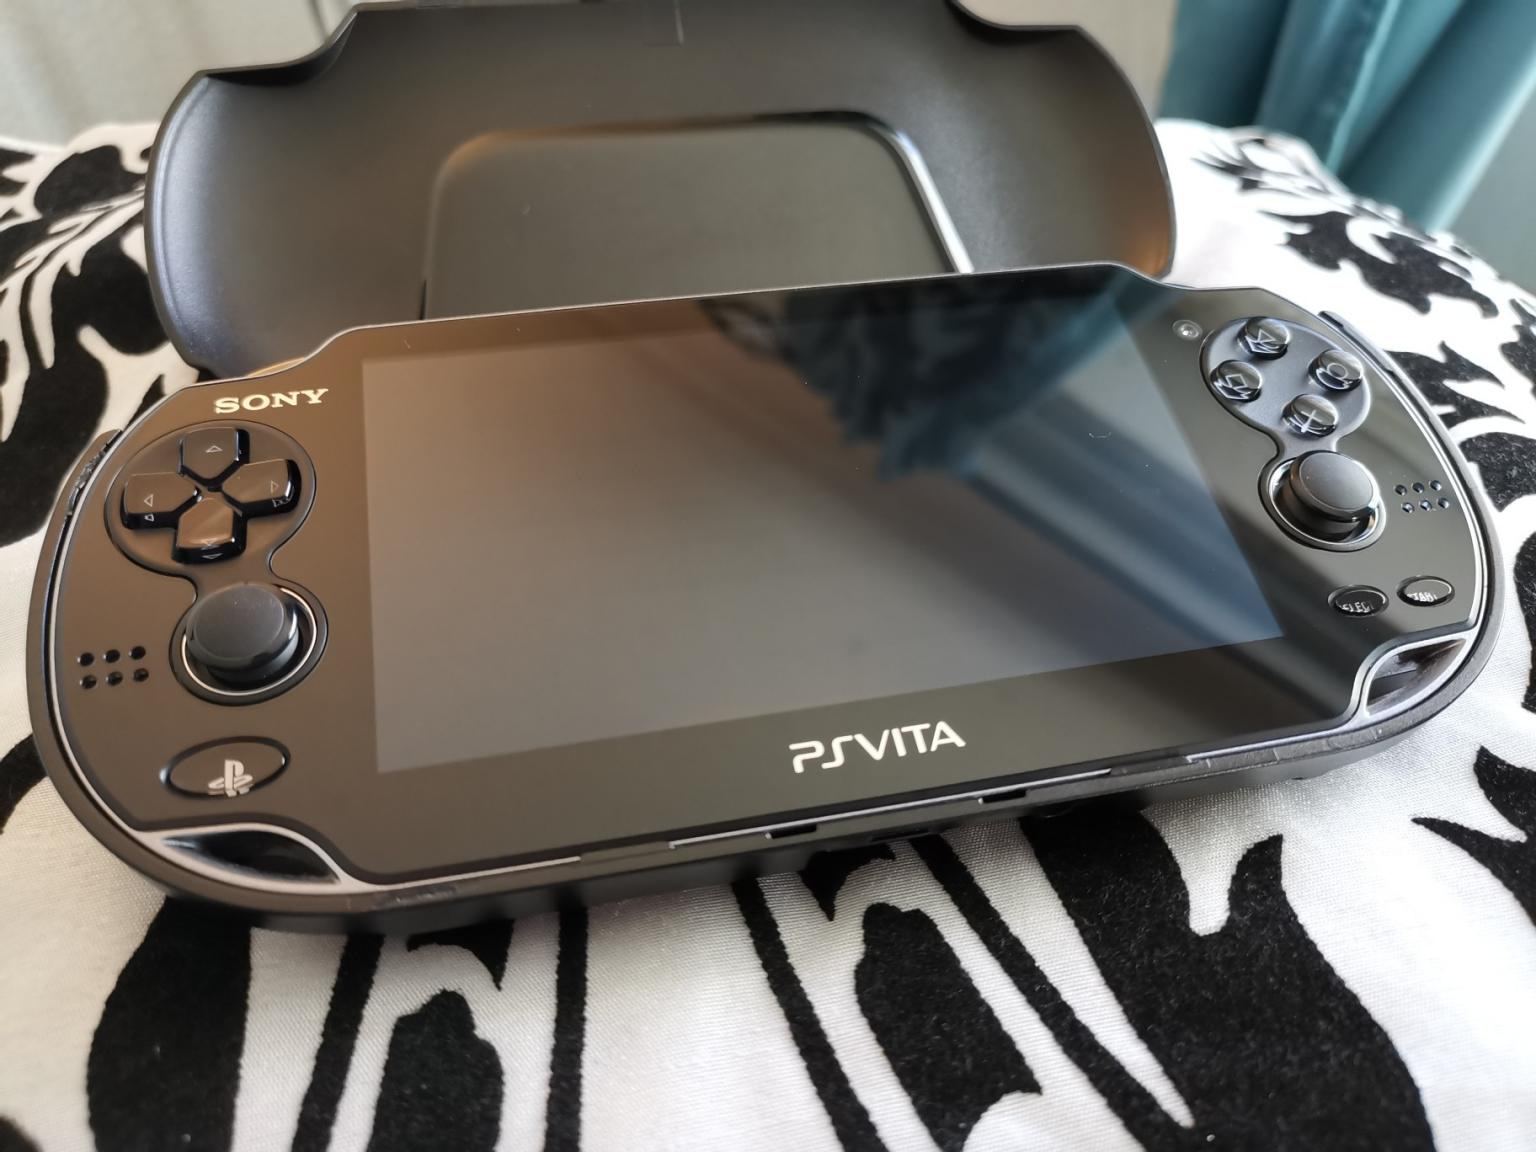 Sony Ps Vita Oled Screen Wifi Bt Pch 1003 Cod In M25 Salford For 85 00 For Sale Shpock